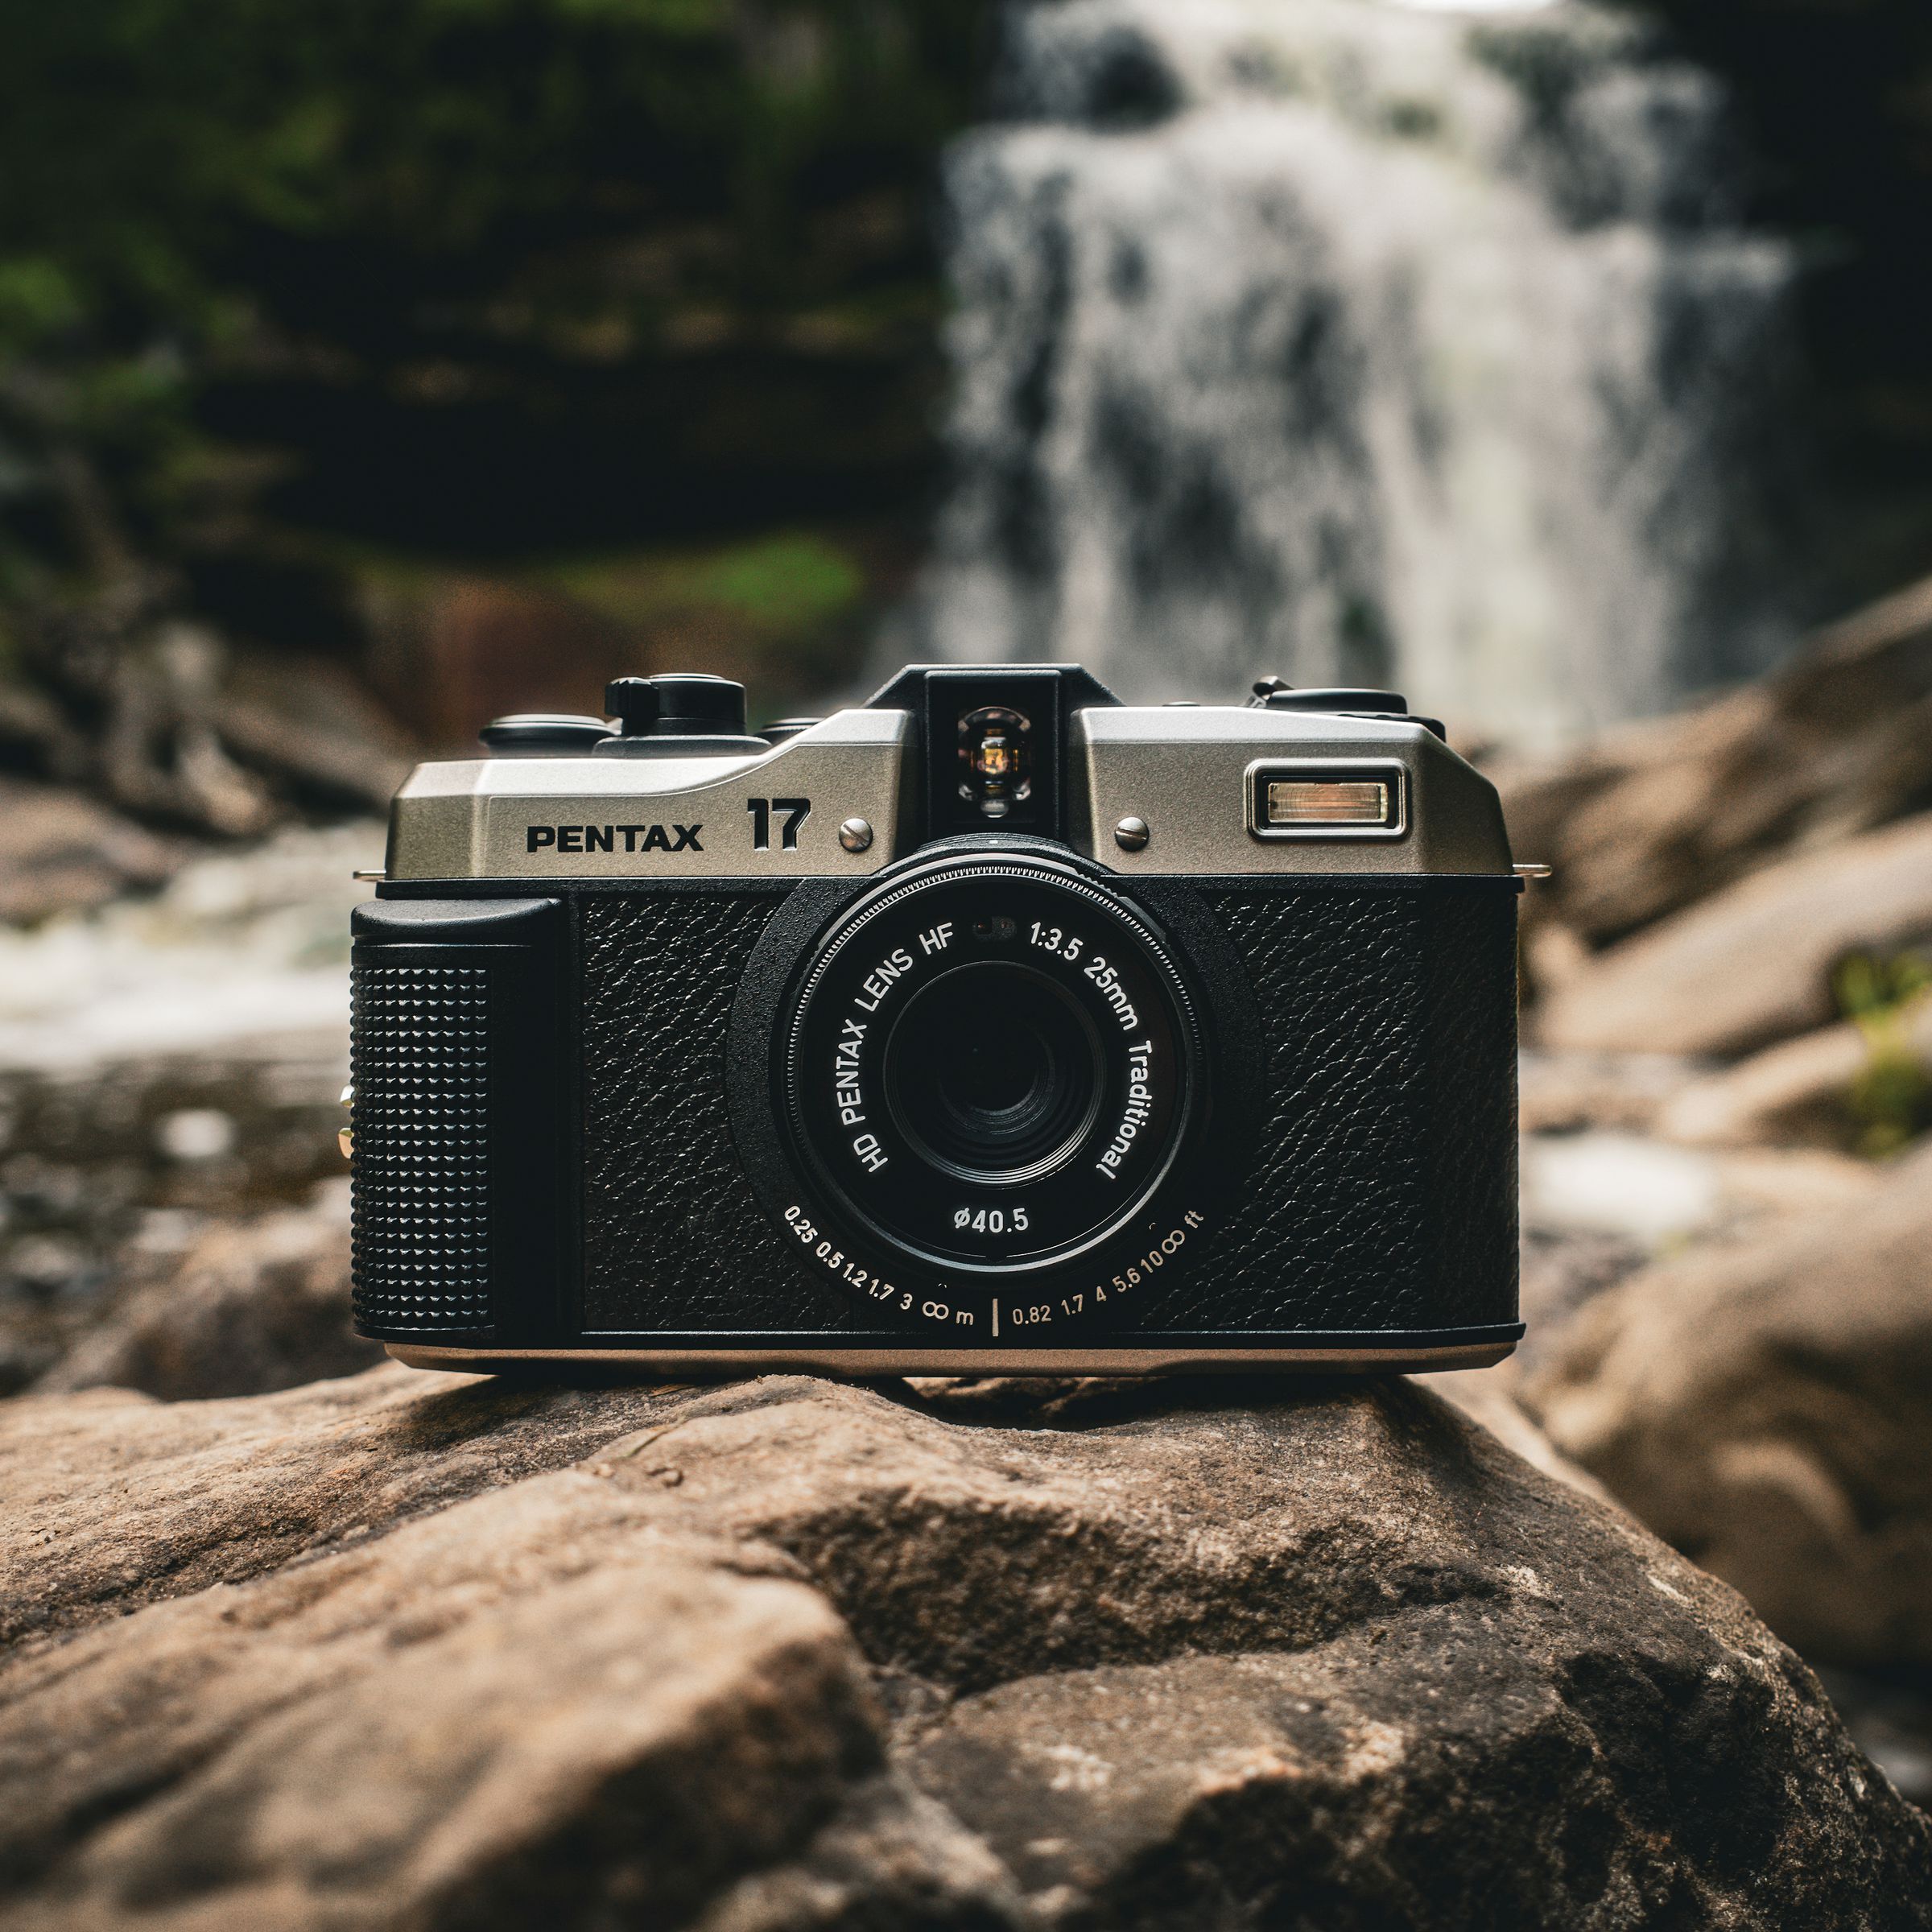 The Pentax 17 film camera resting on rocks in front of a waterfall.